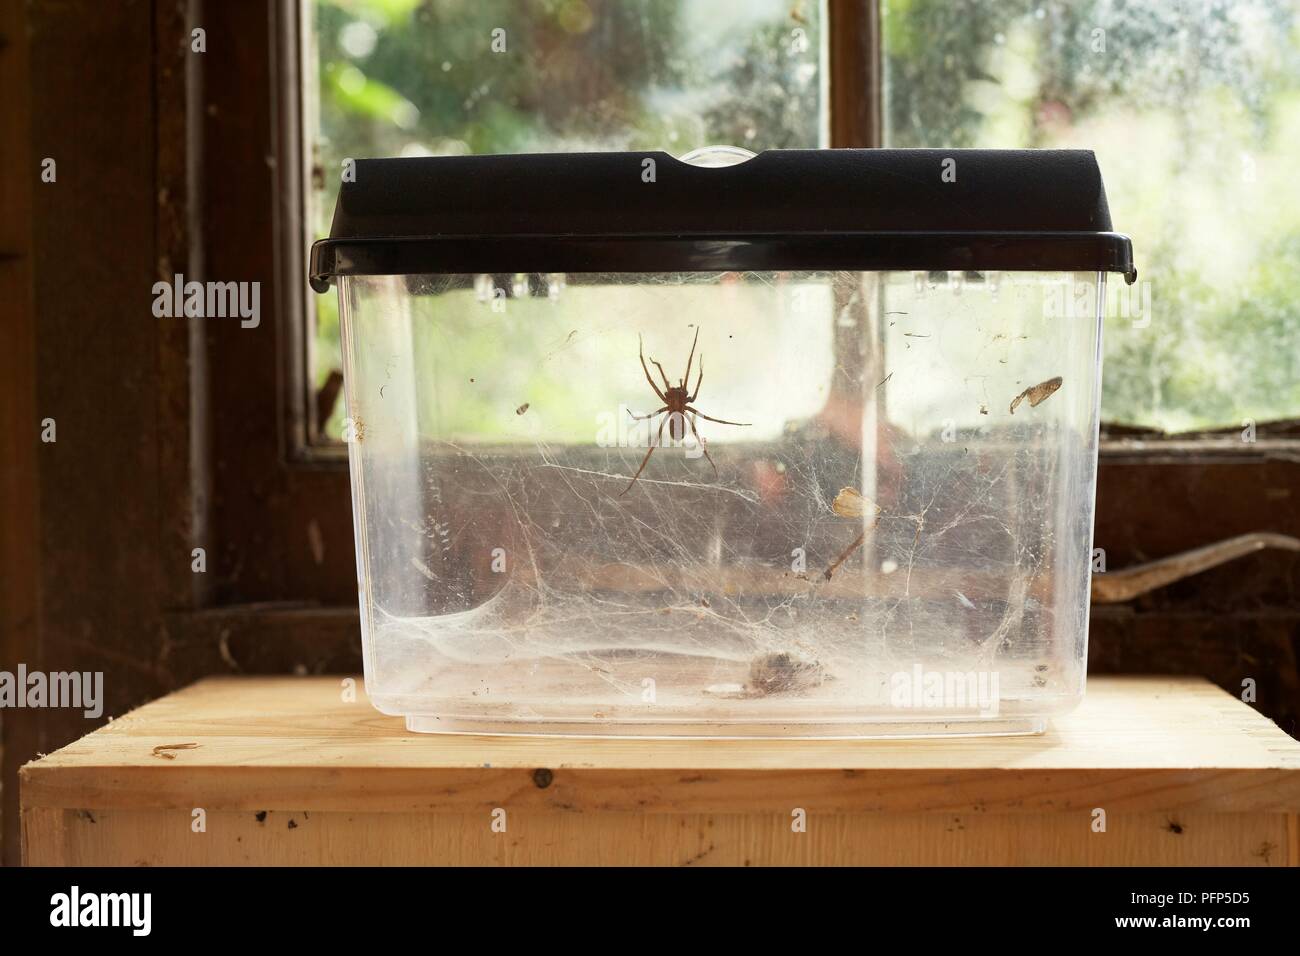 House spider (Tegenaria sp.) in see-through container Stock Photo